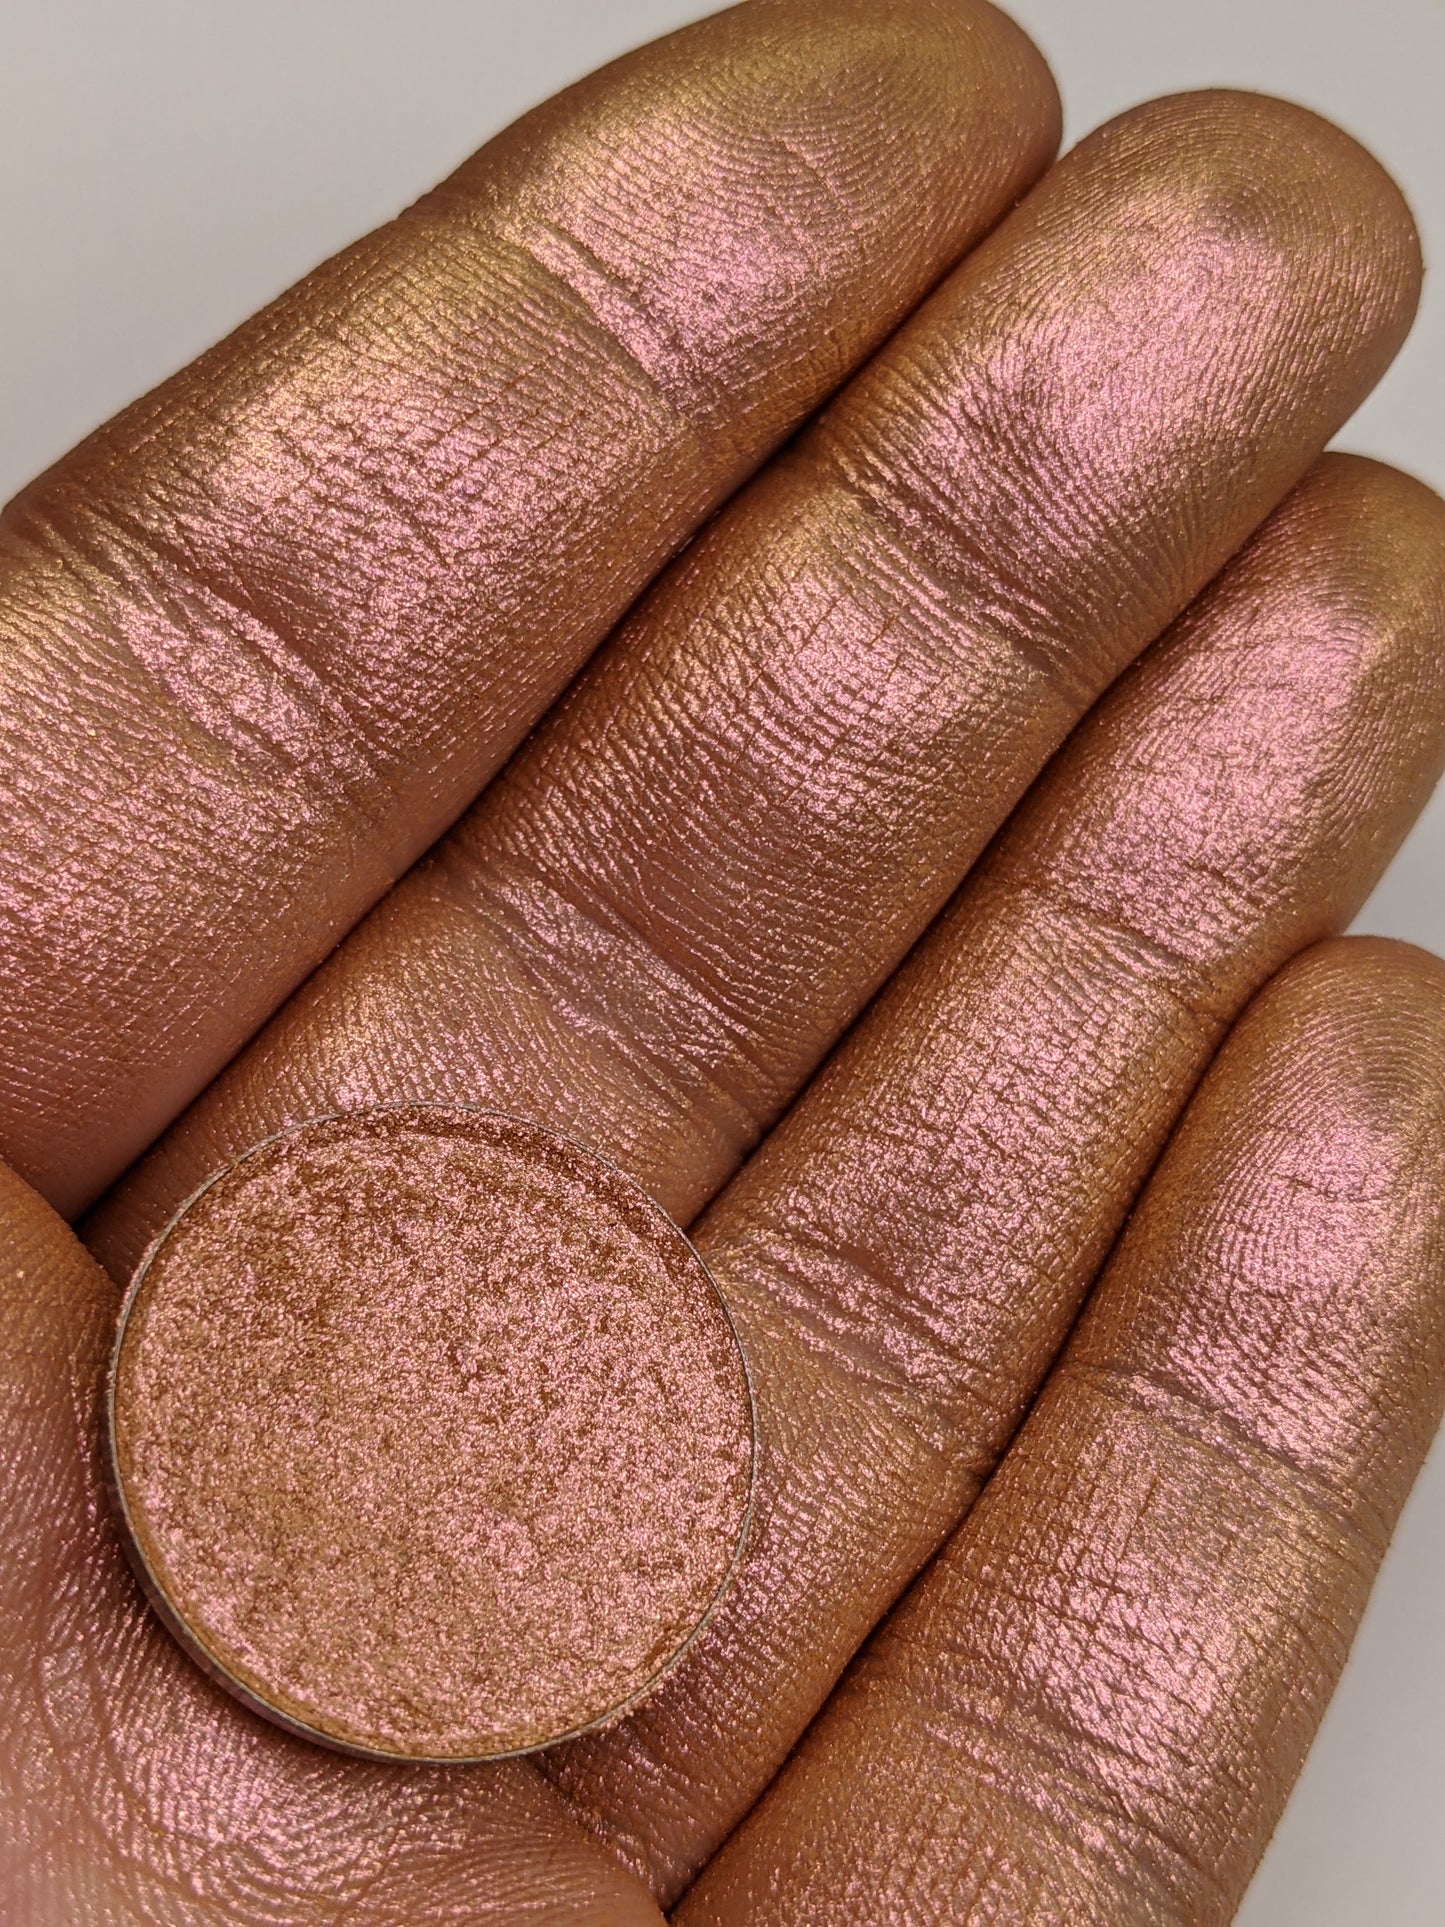 Hircine - Eyeshadow Duochrome/Multichrome Gold, Peachy-Champagne, Red